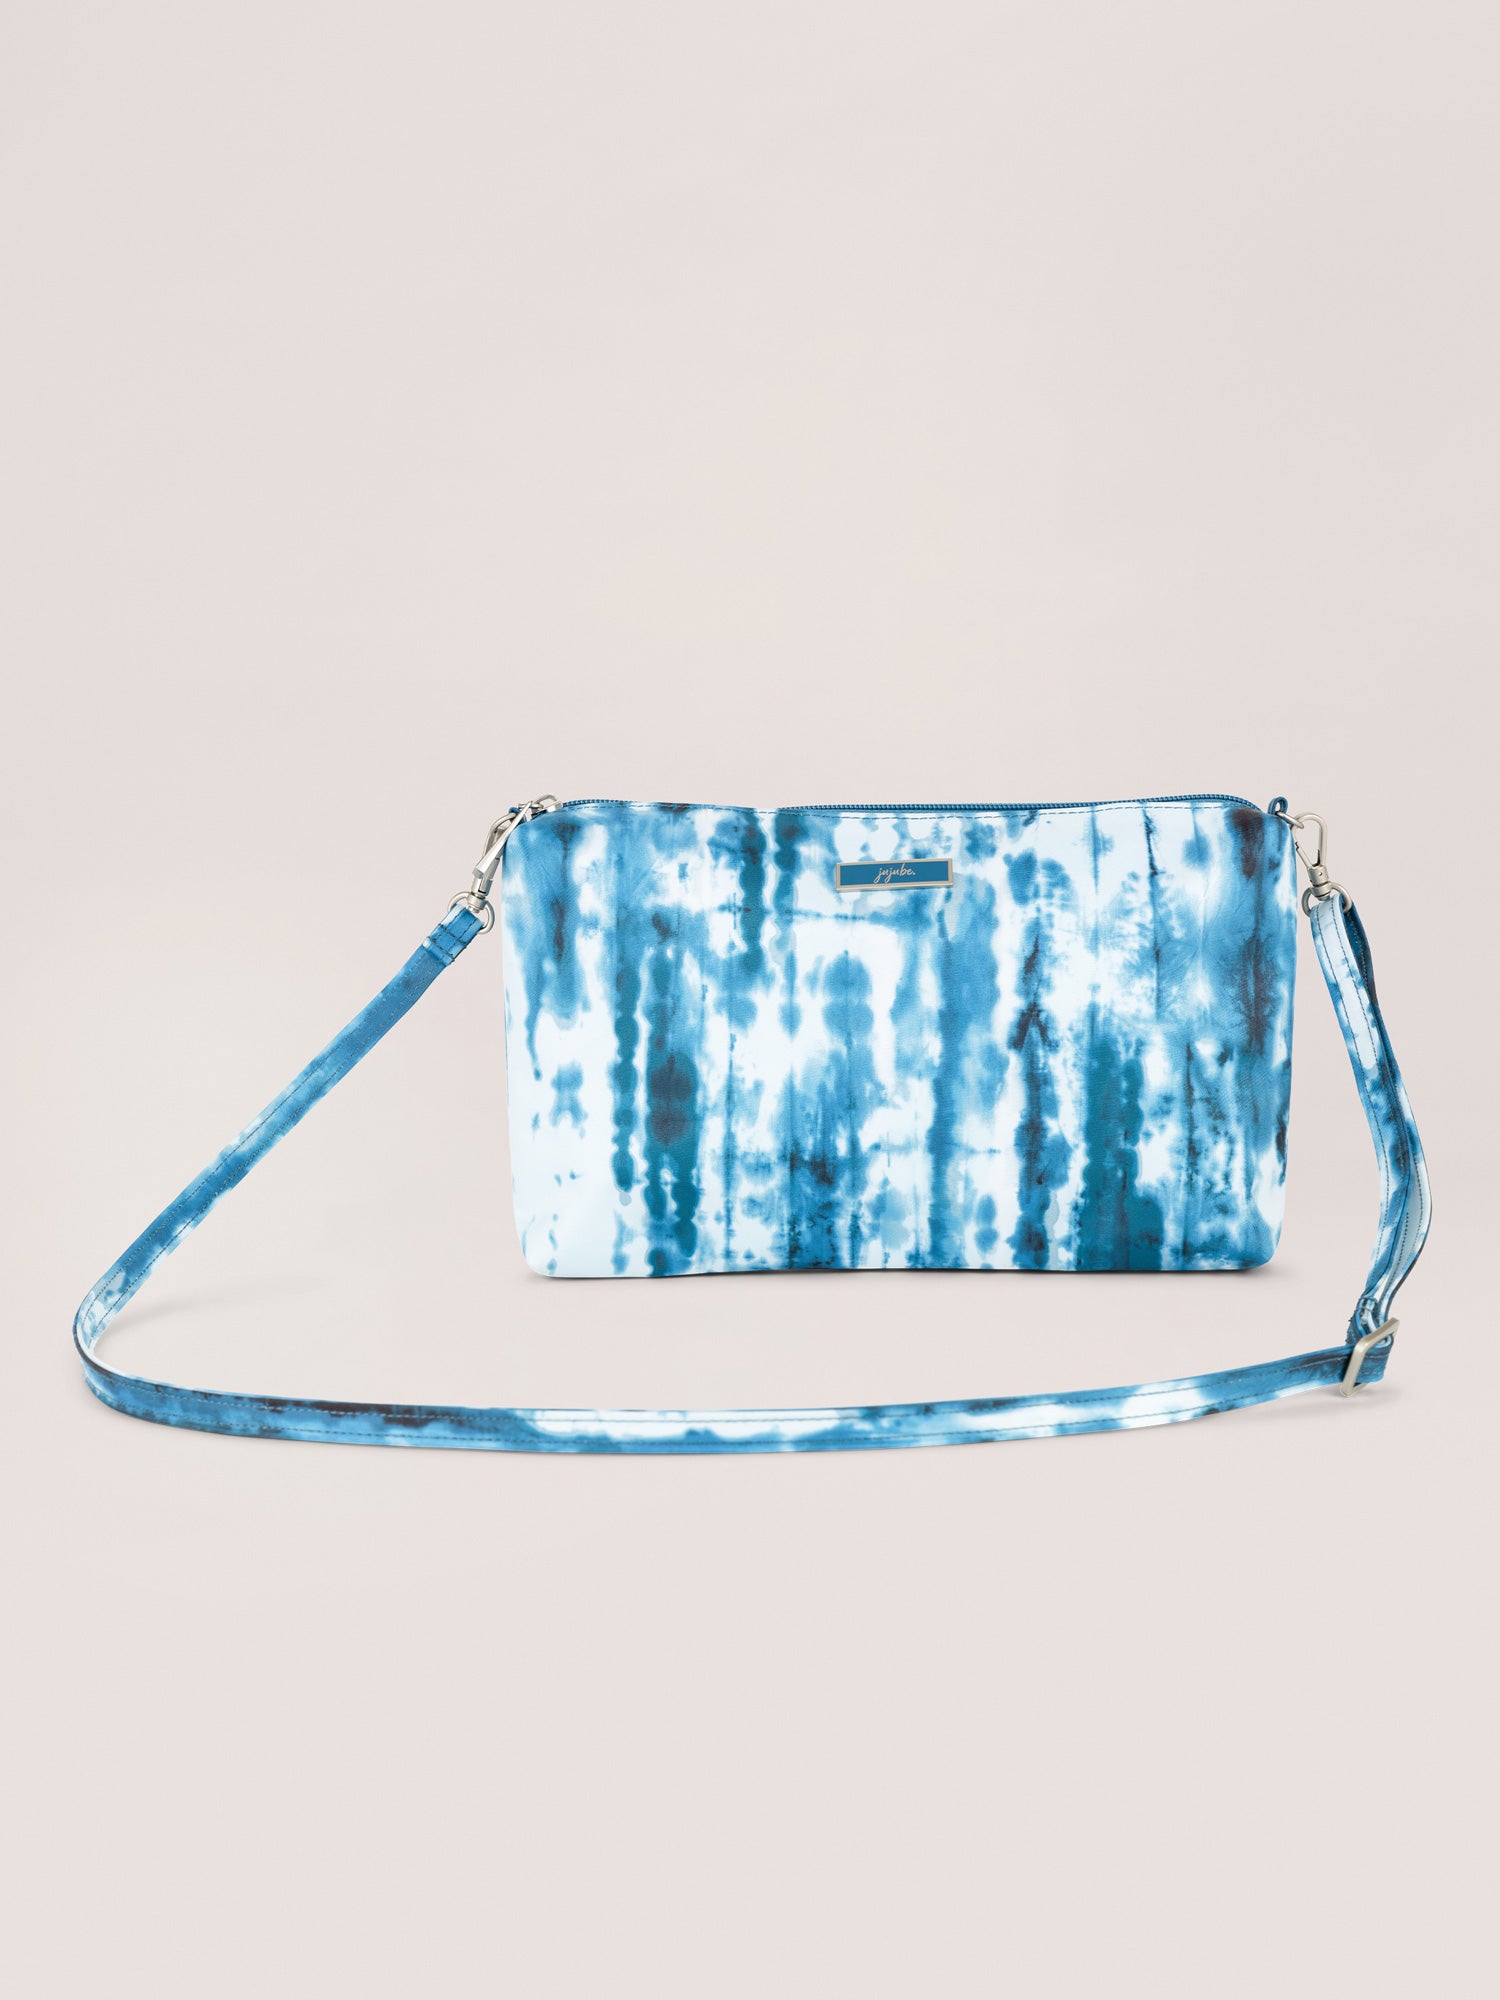 Blue and White Tie Dye Print Be Quick Crossbody Pouch Front View with Long Strap